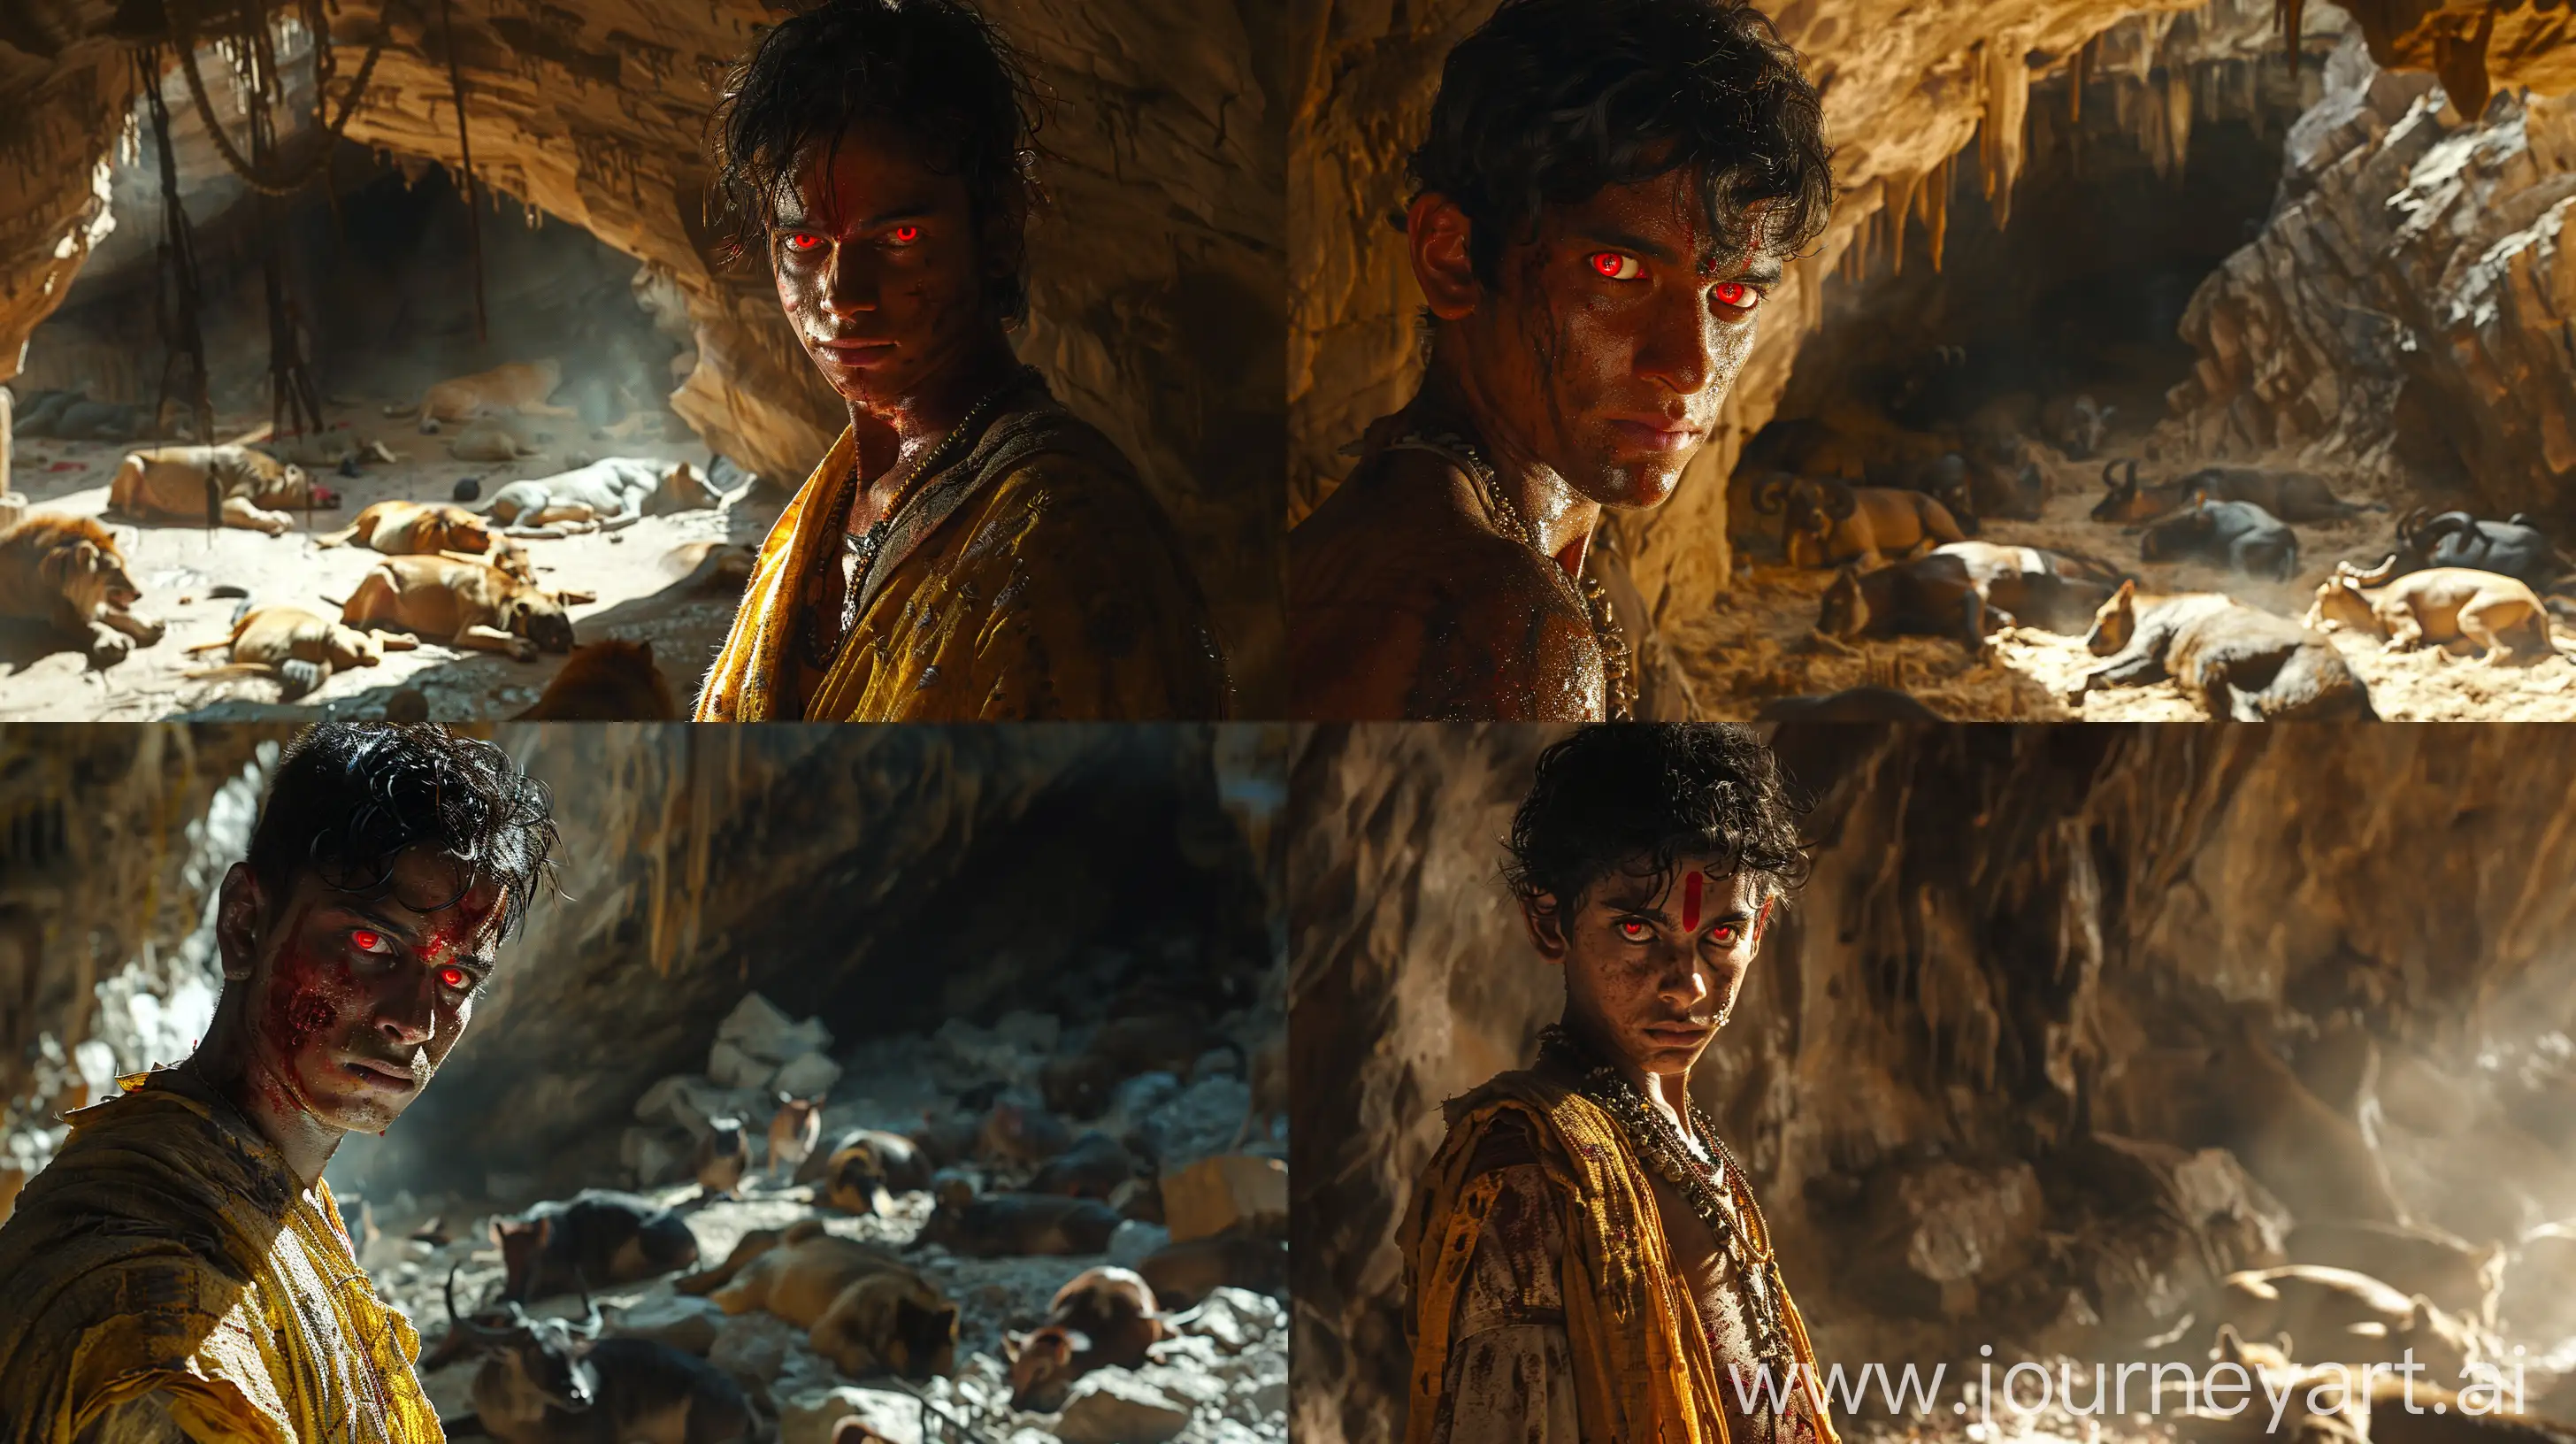 Sinister-Young-Antagonist-in-Ancient-Indian-Cave-Ominous-Portrait